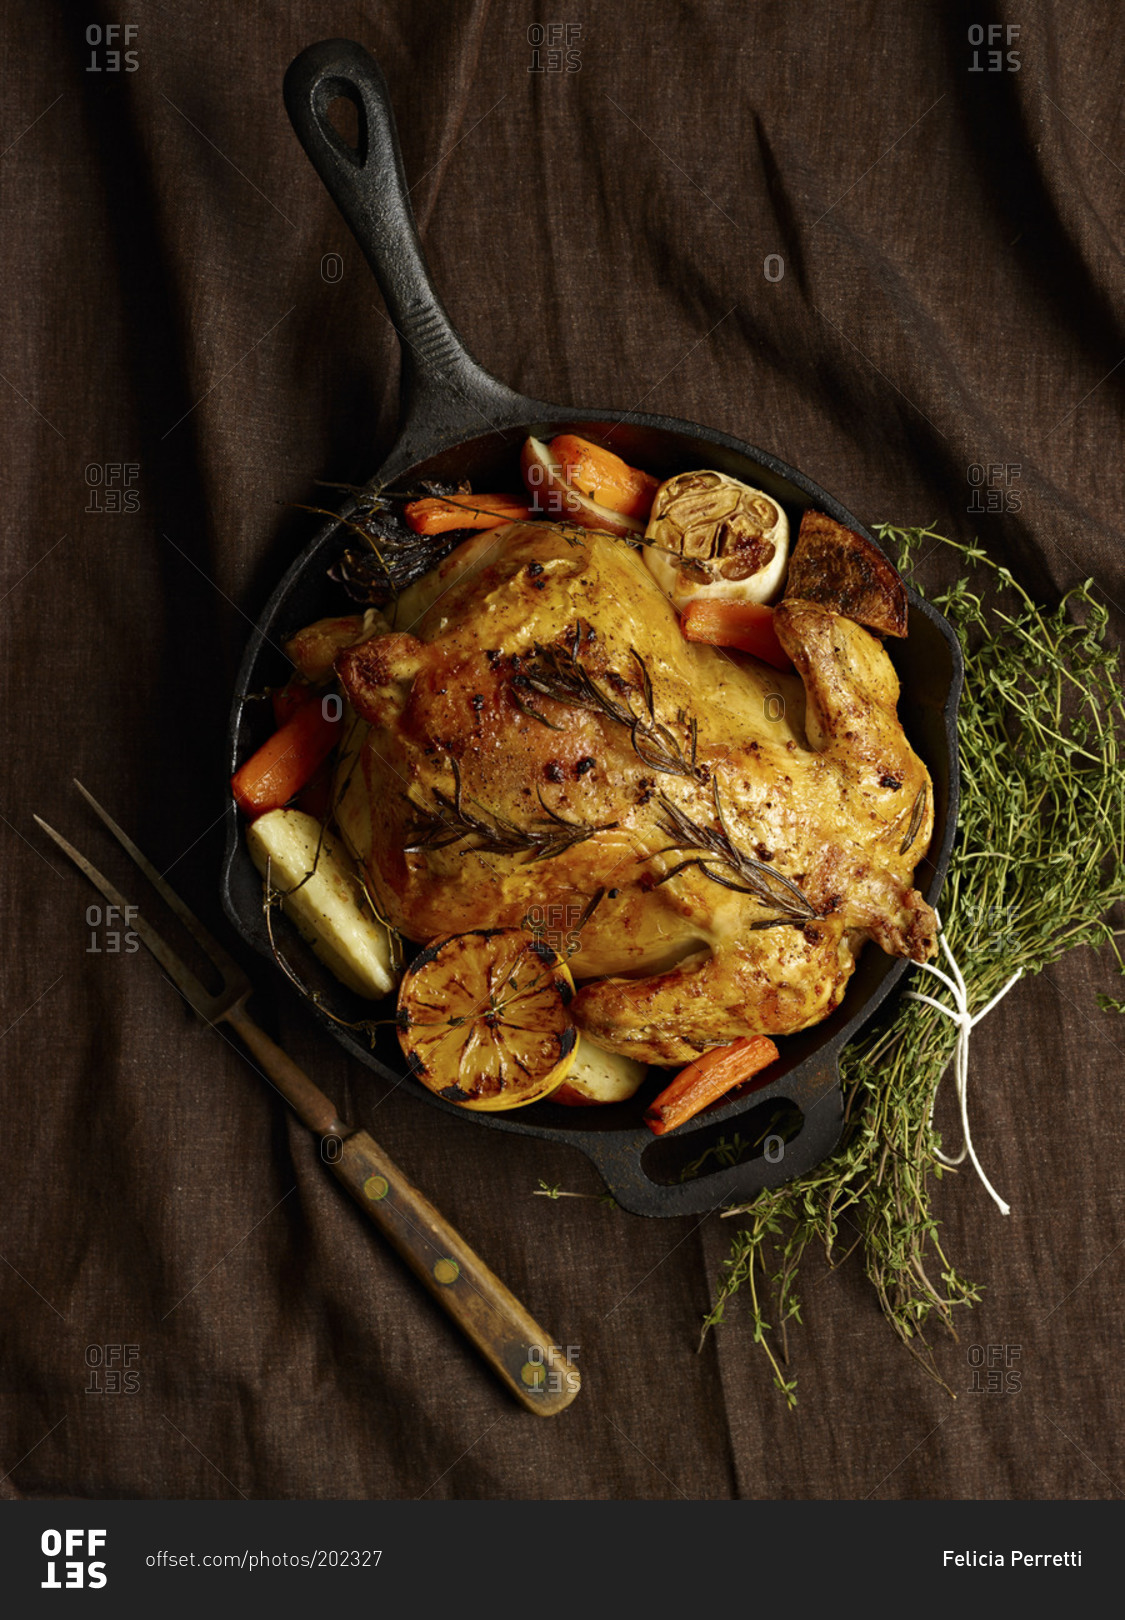 A whole roasted chicken and a carving fork